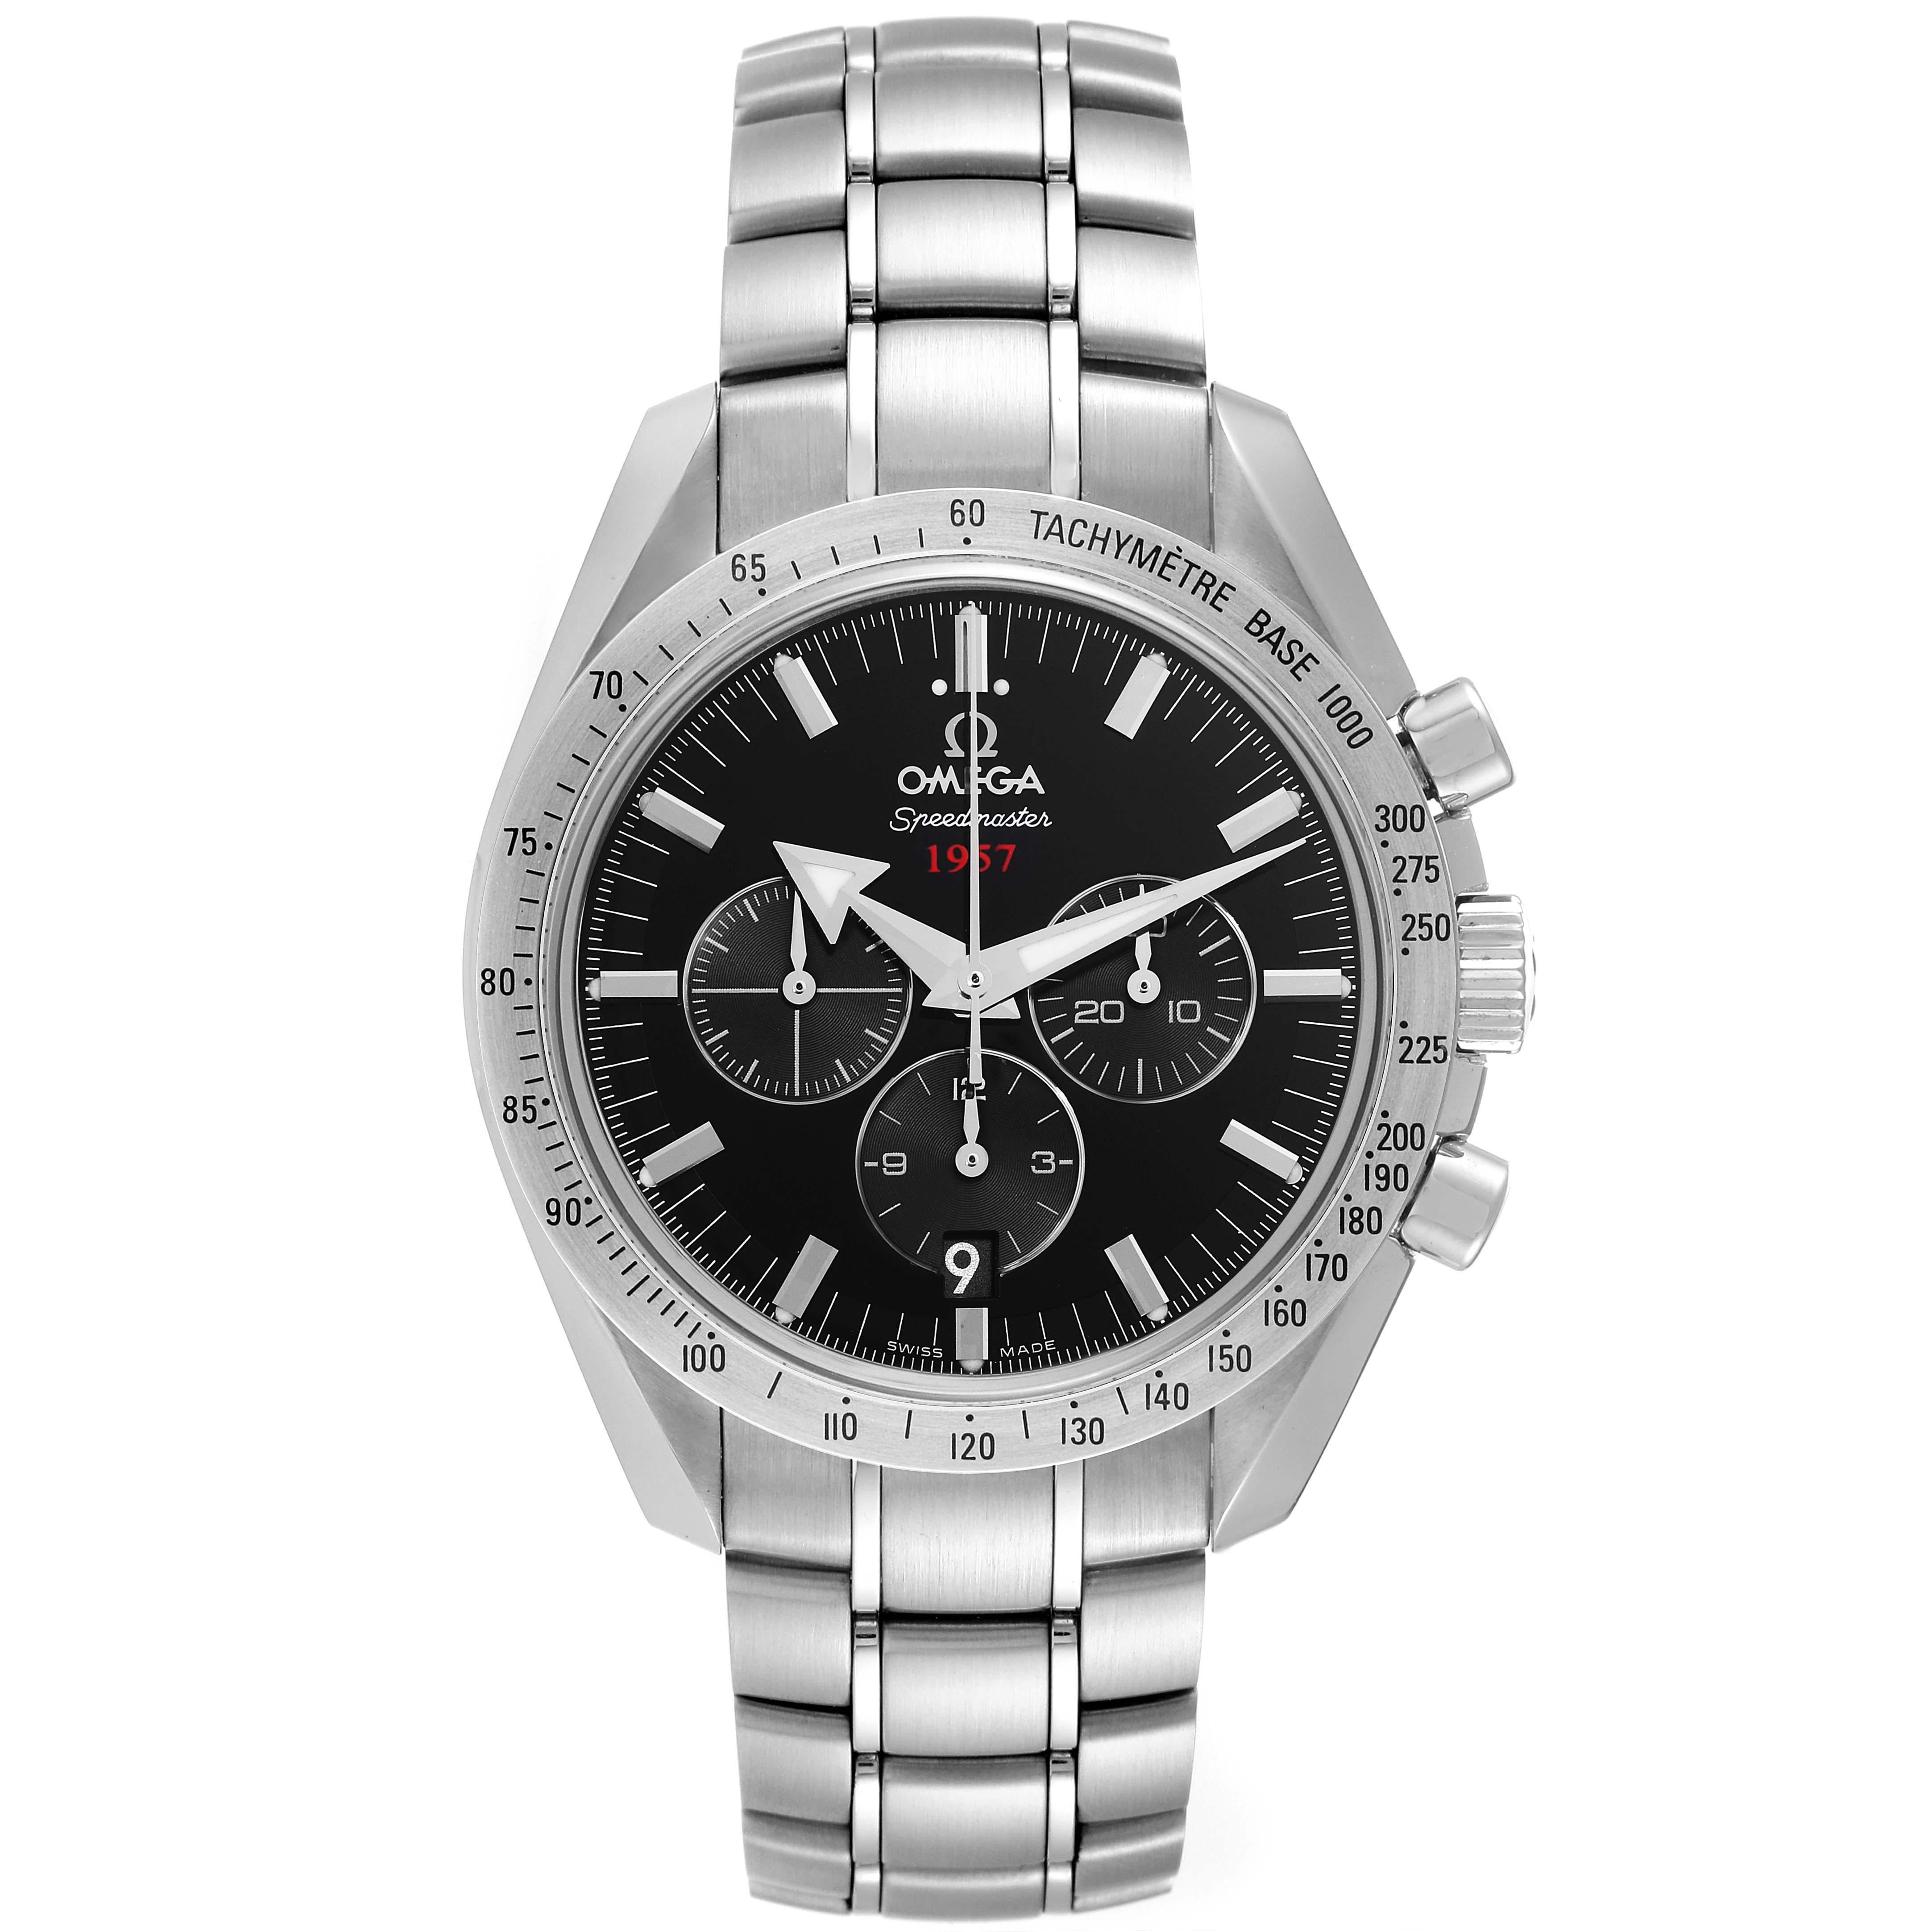 Omega Speedmaster Broad Arrow 1957 Steel Mens Watch 321.10.42.50.01.001 Box Card. Automatic self-winding chronograph movement with column wheel mechanism and Co-Axial Escapement. Stainless steel round case 42.0 mm in diameter. Transparent exhibition